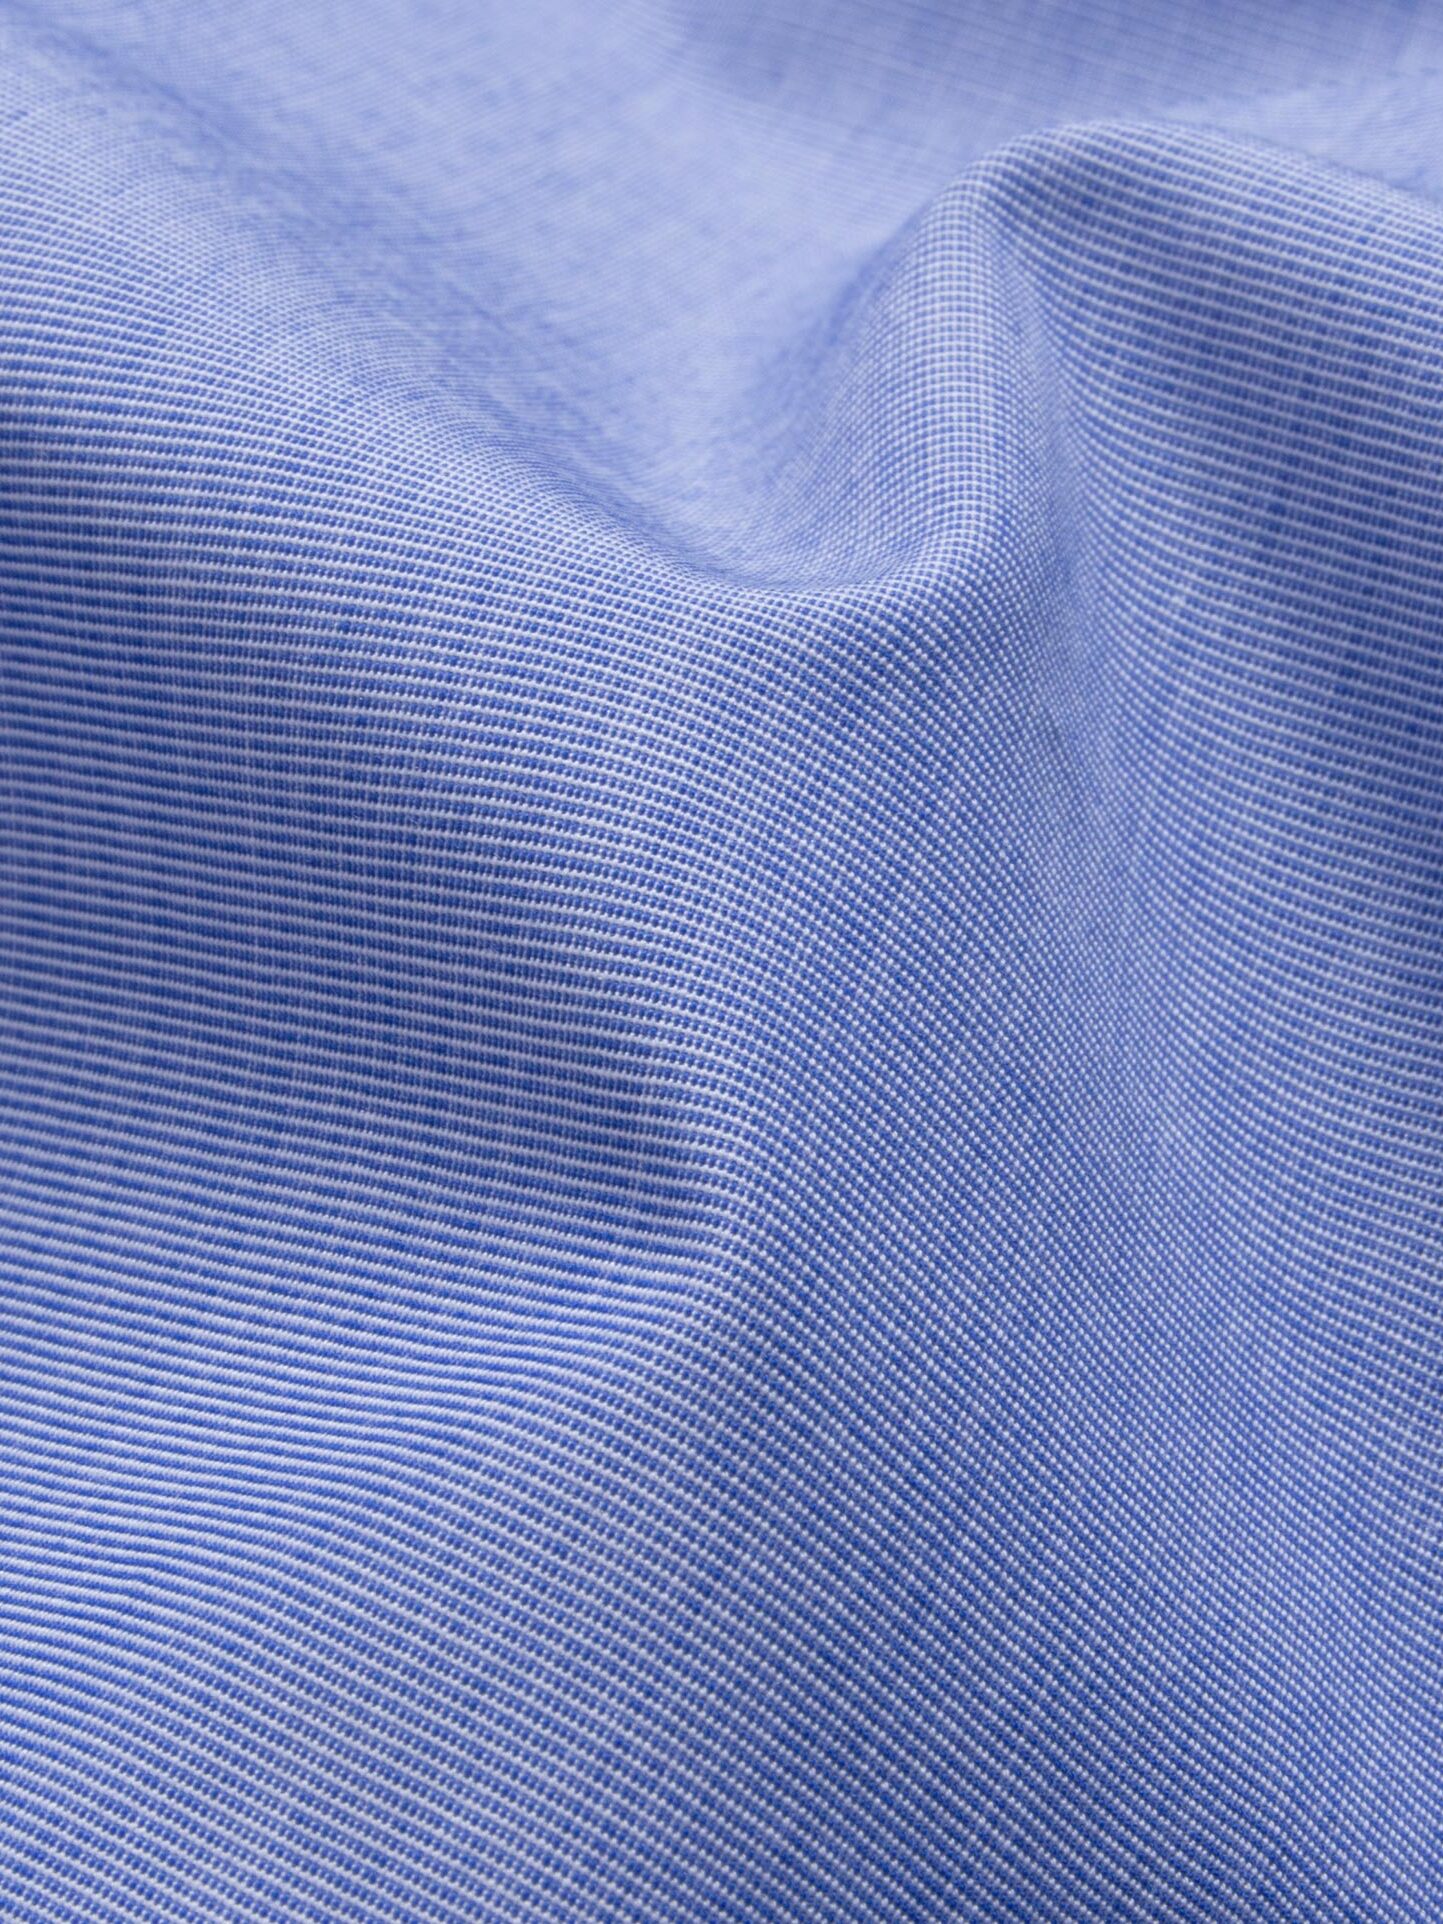 French Blue 100s End-on-End Shirts by Proper Cloth